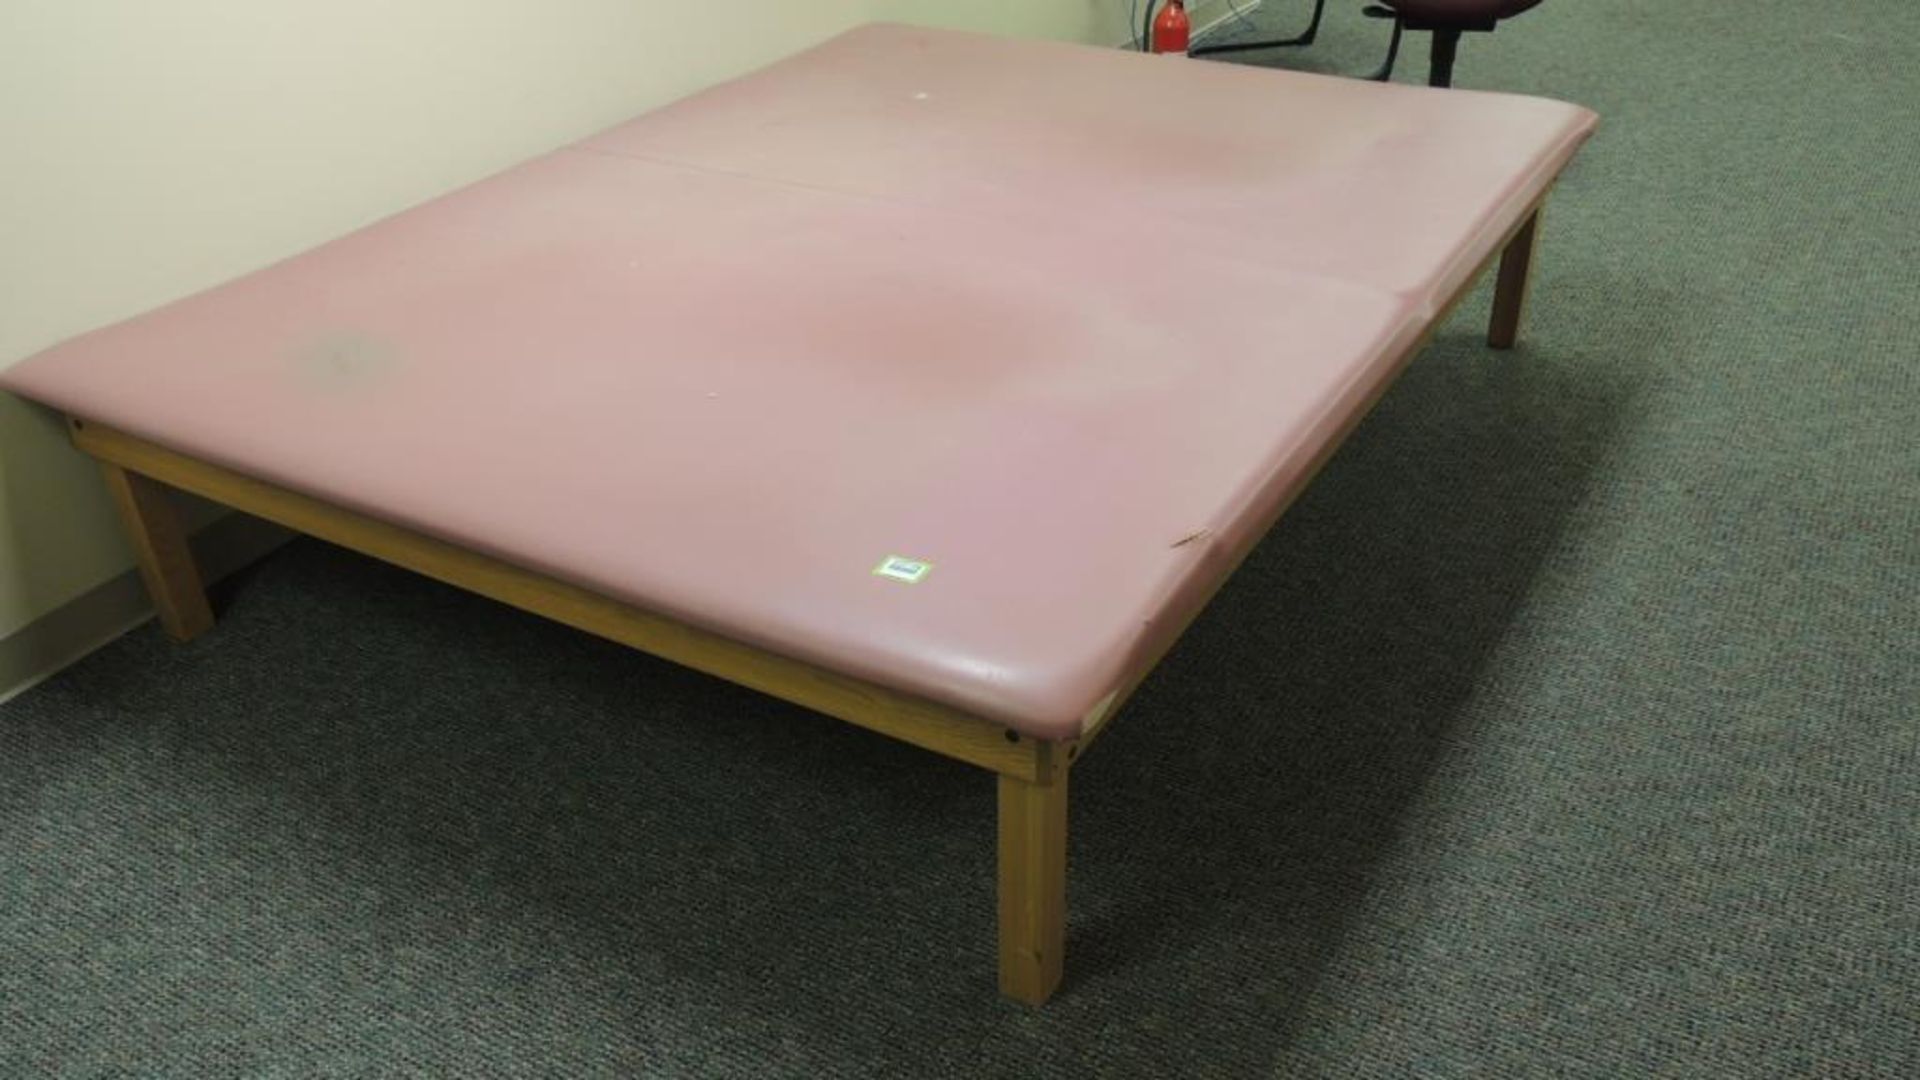 Therapy Mat - Image 2 of 2